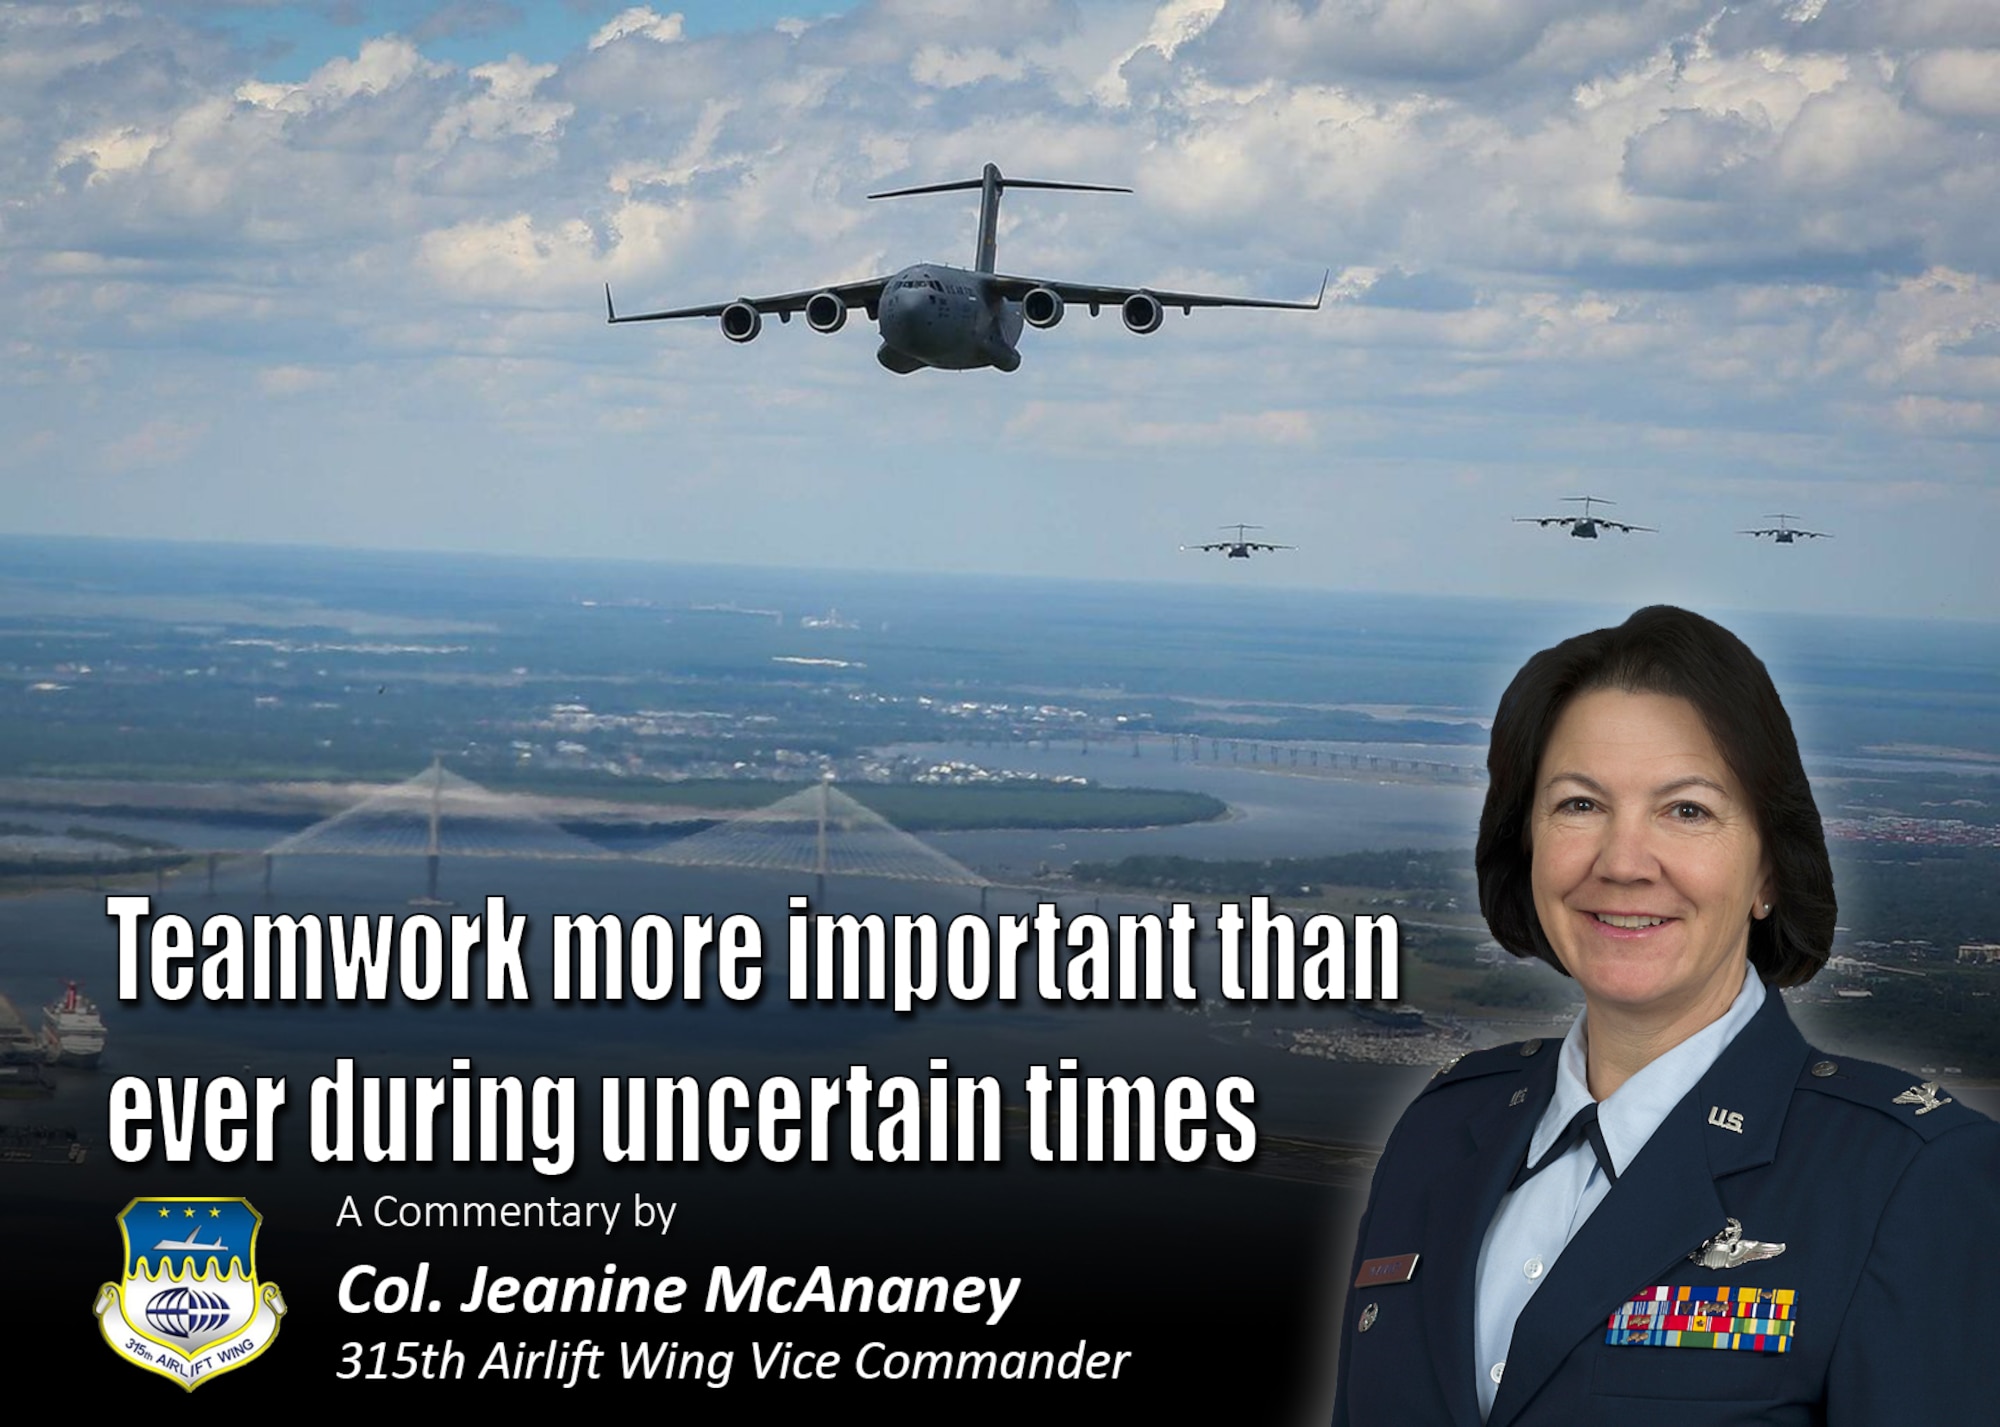 Teamwork more important than ever during uncertain times.  A commentary by Col. Jeanine McAnaney, 315th Airlift Wing vice commander. (U.S. Air Force Graphic / Michael Dukes)